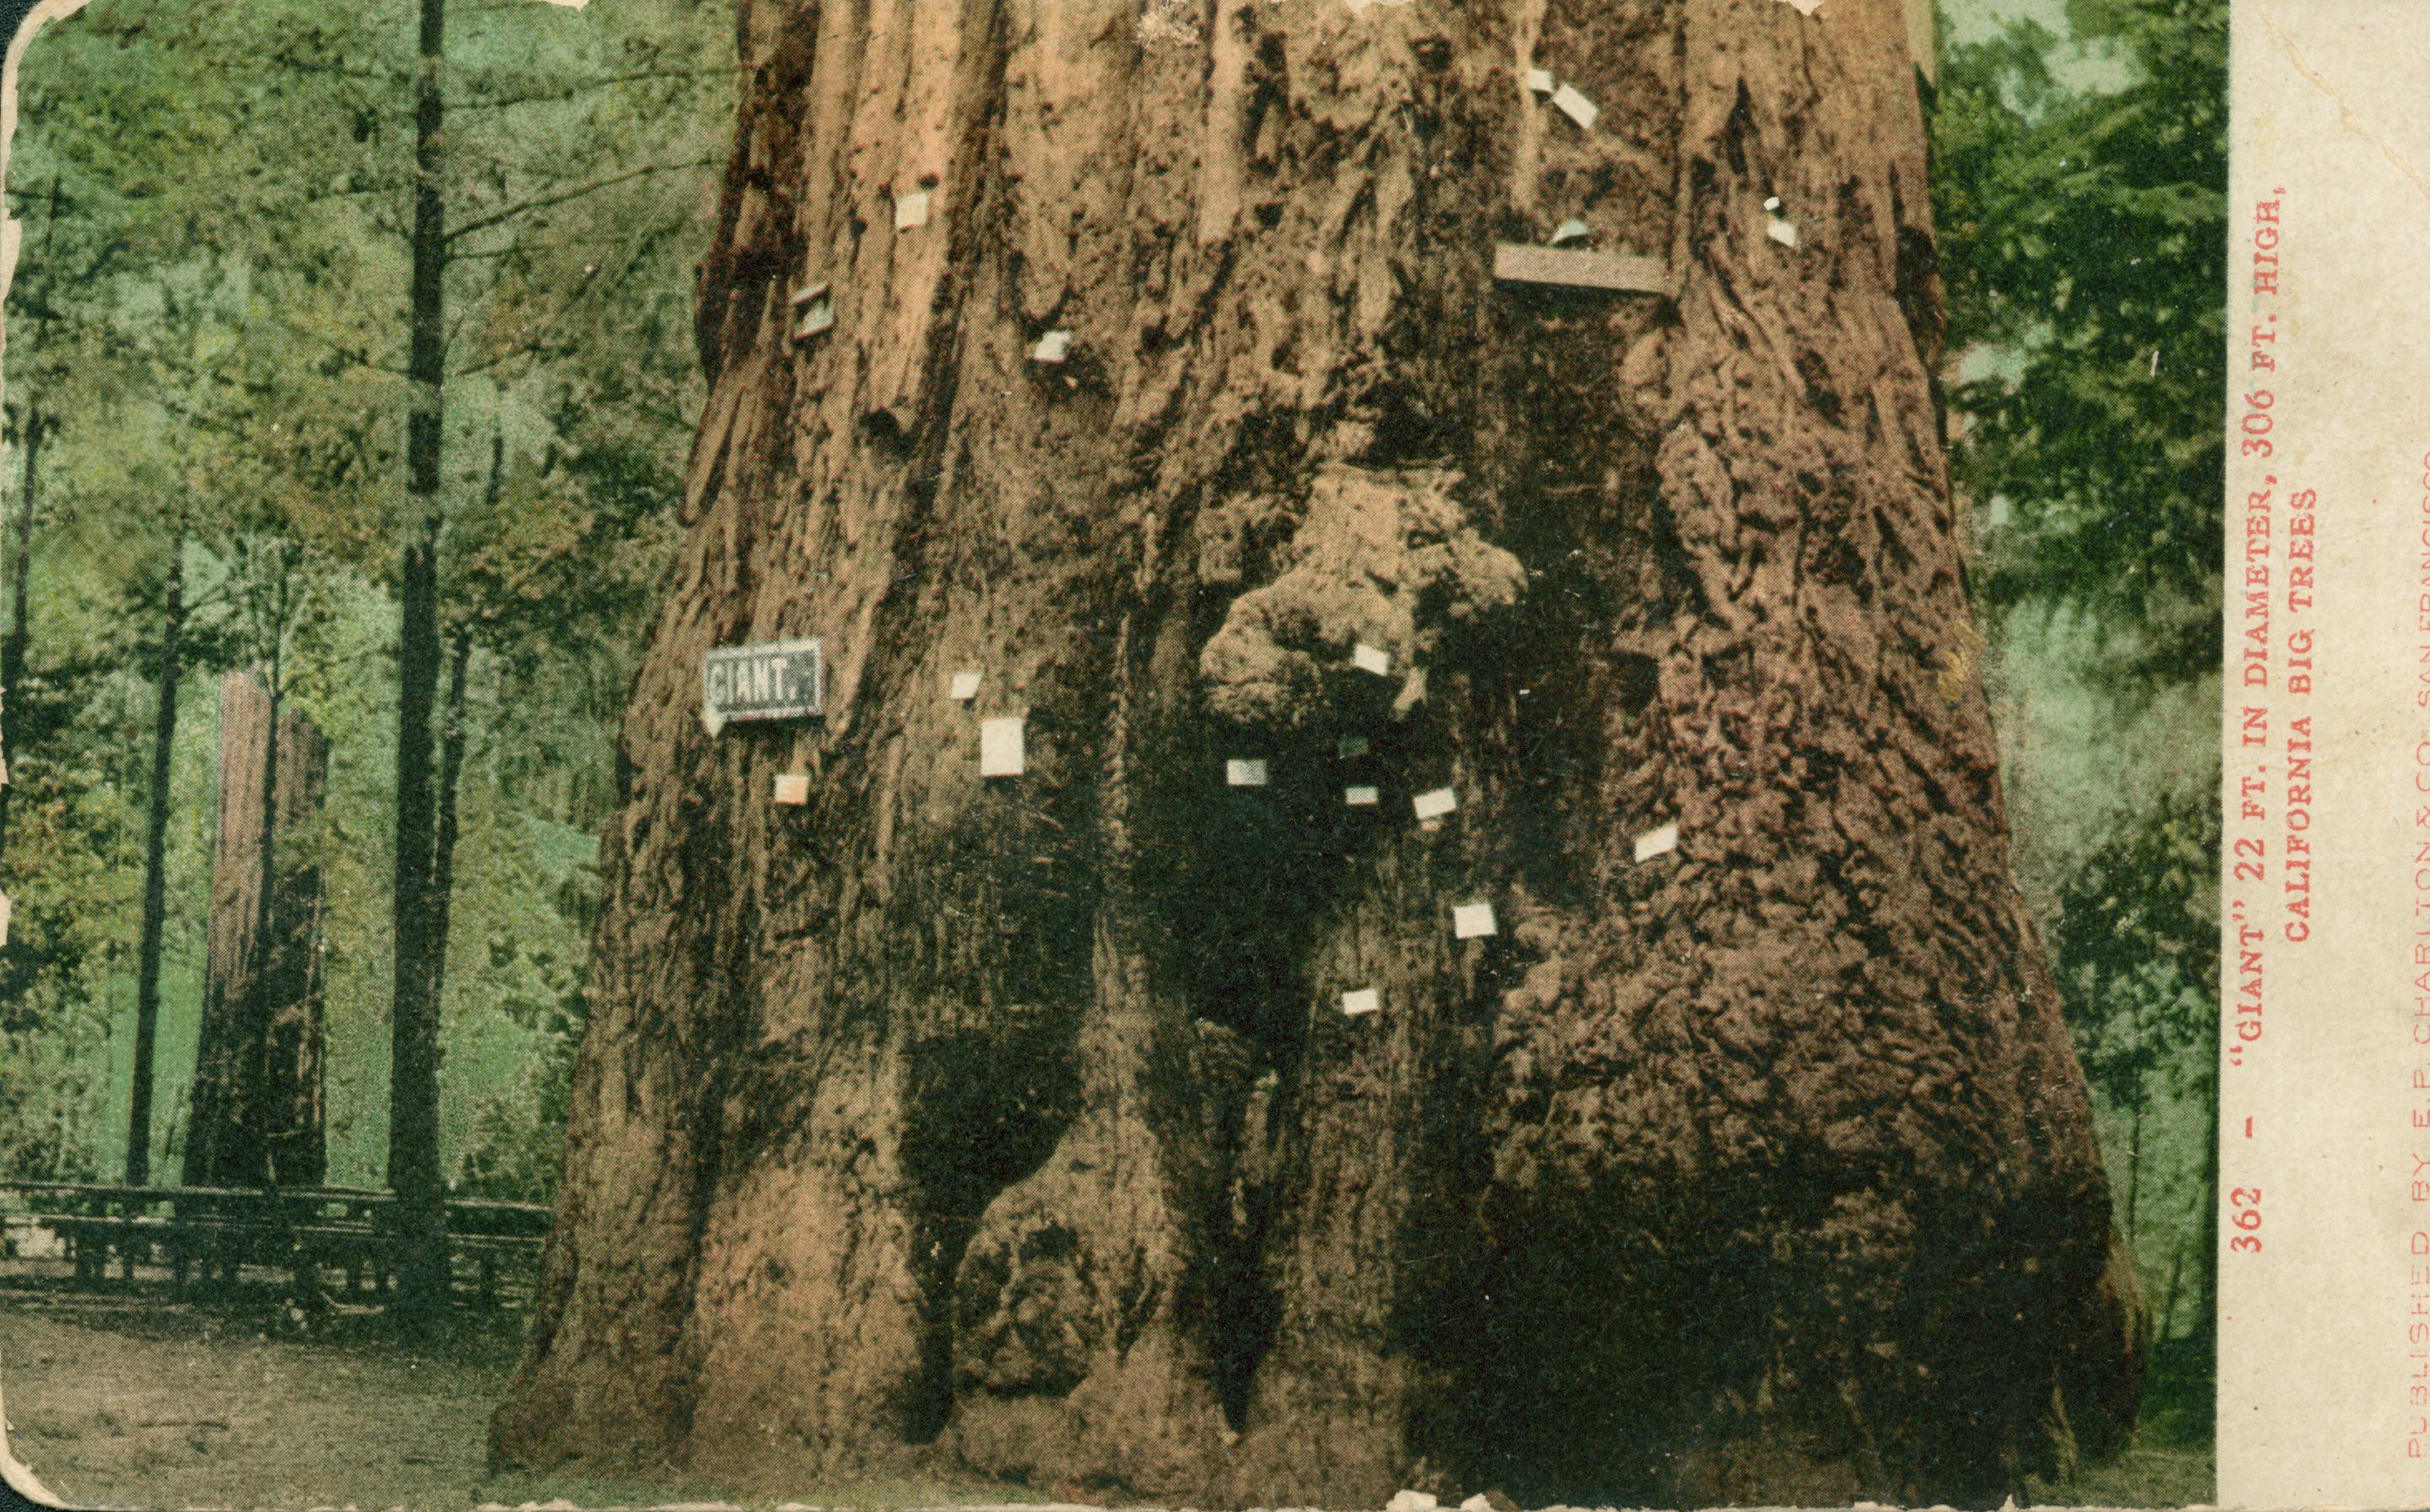 Shows base of a tree named 'Giant'